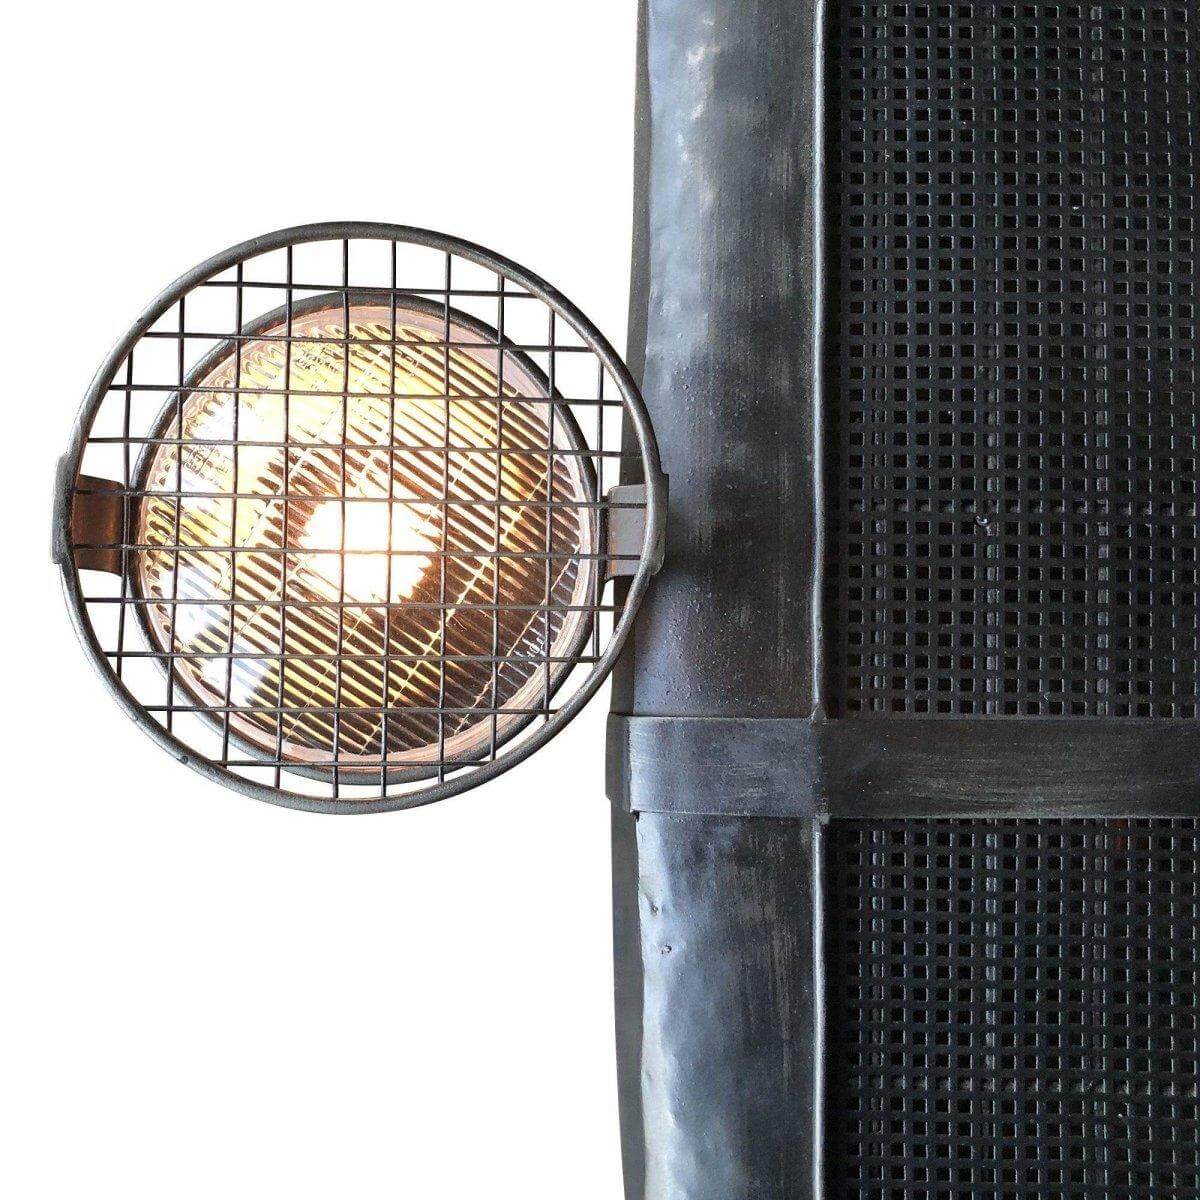 Classic Car Grille 3D Metal Wall Art - Working Headlights - 37" Model in partnership with Rustic Deco Incorporated